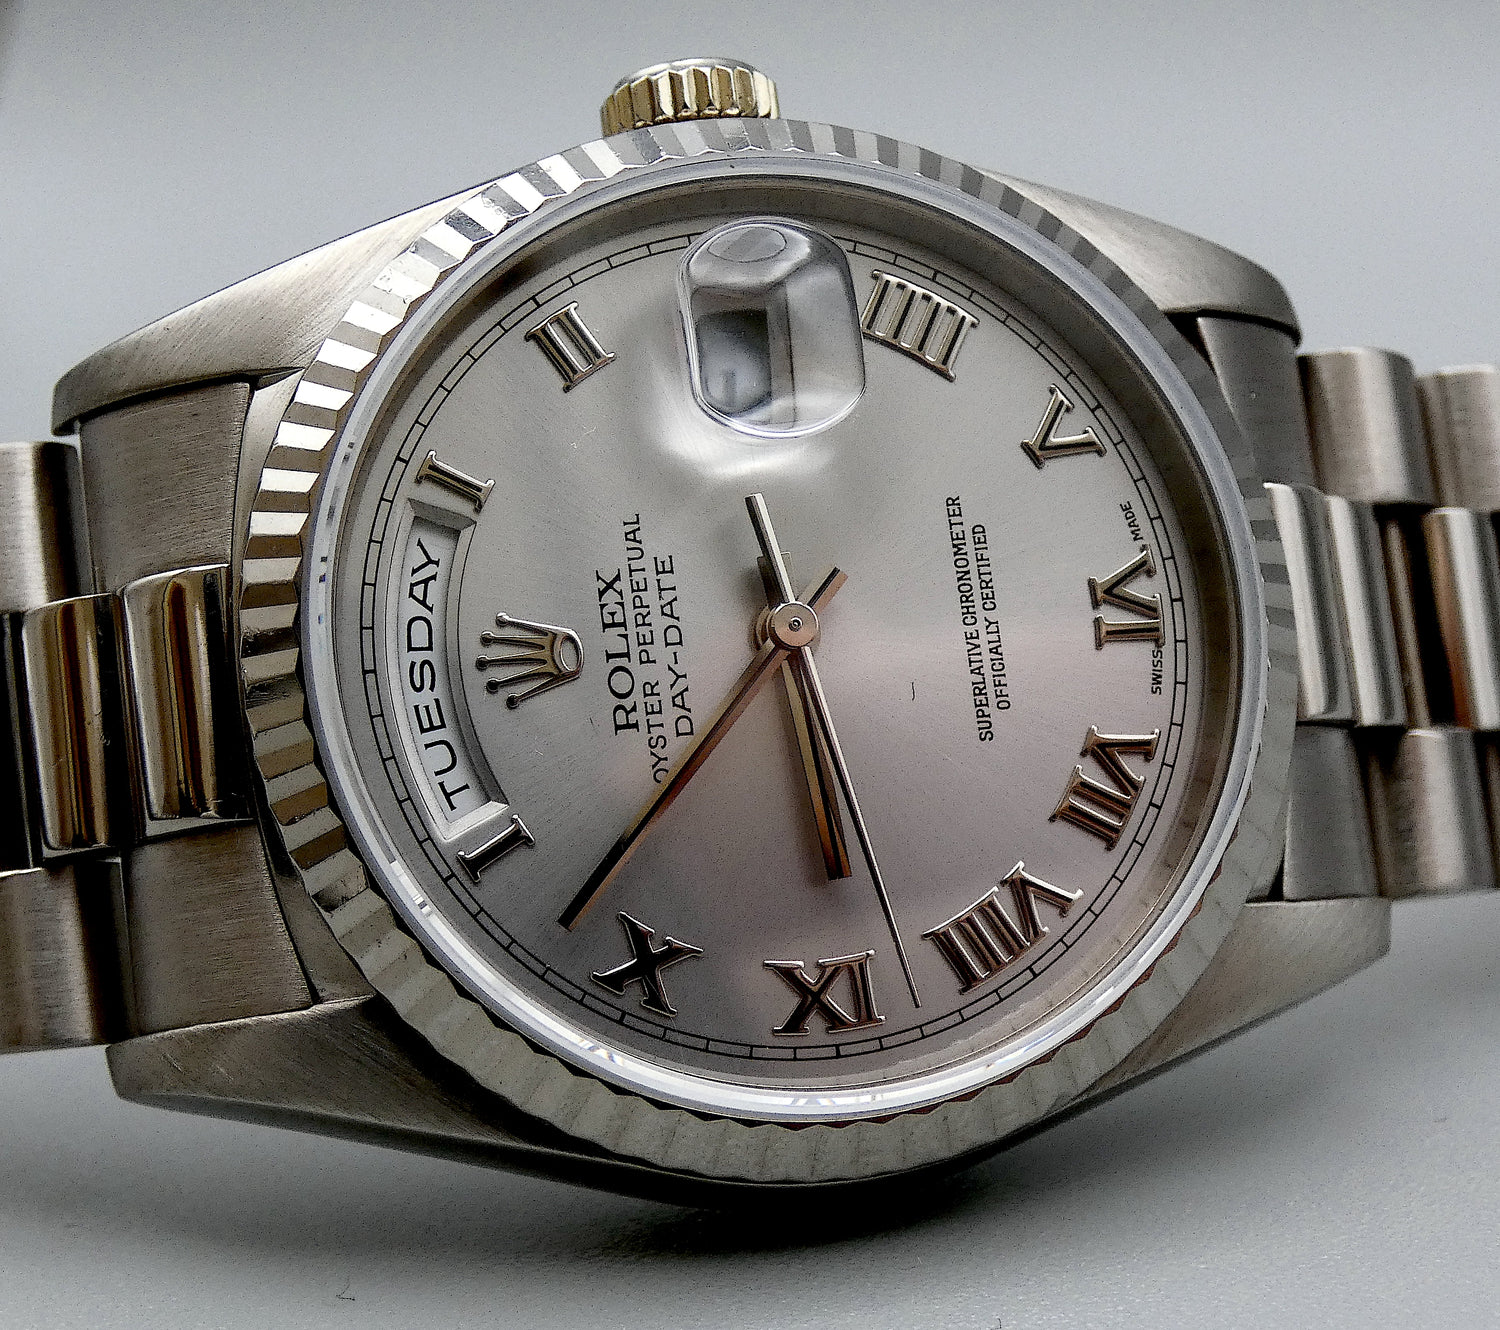 SOLD Rolex Day-Date 36 White gold - serviced - warranty